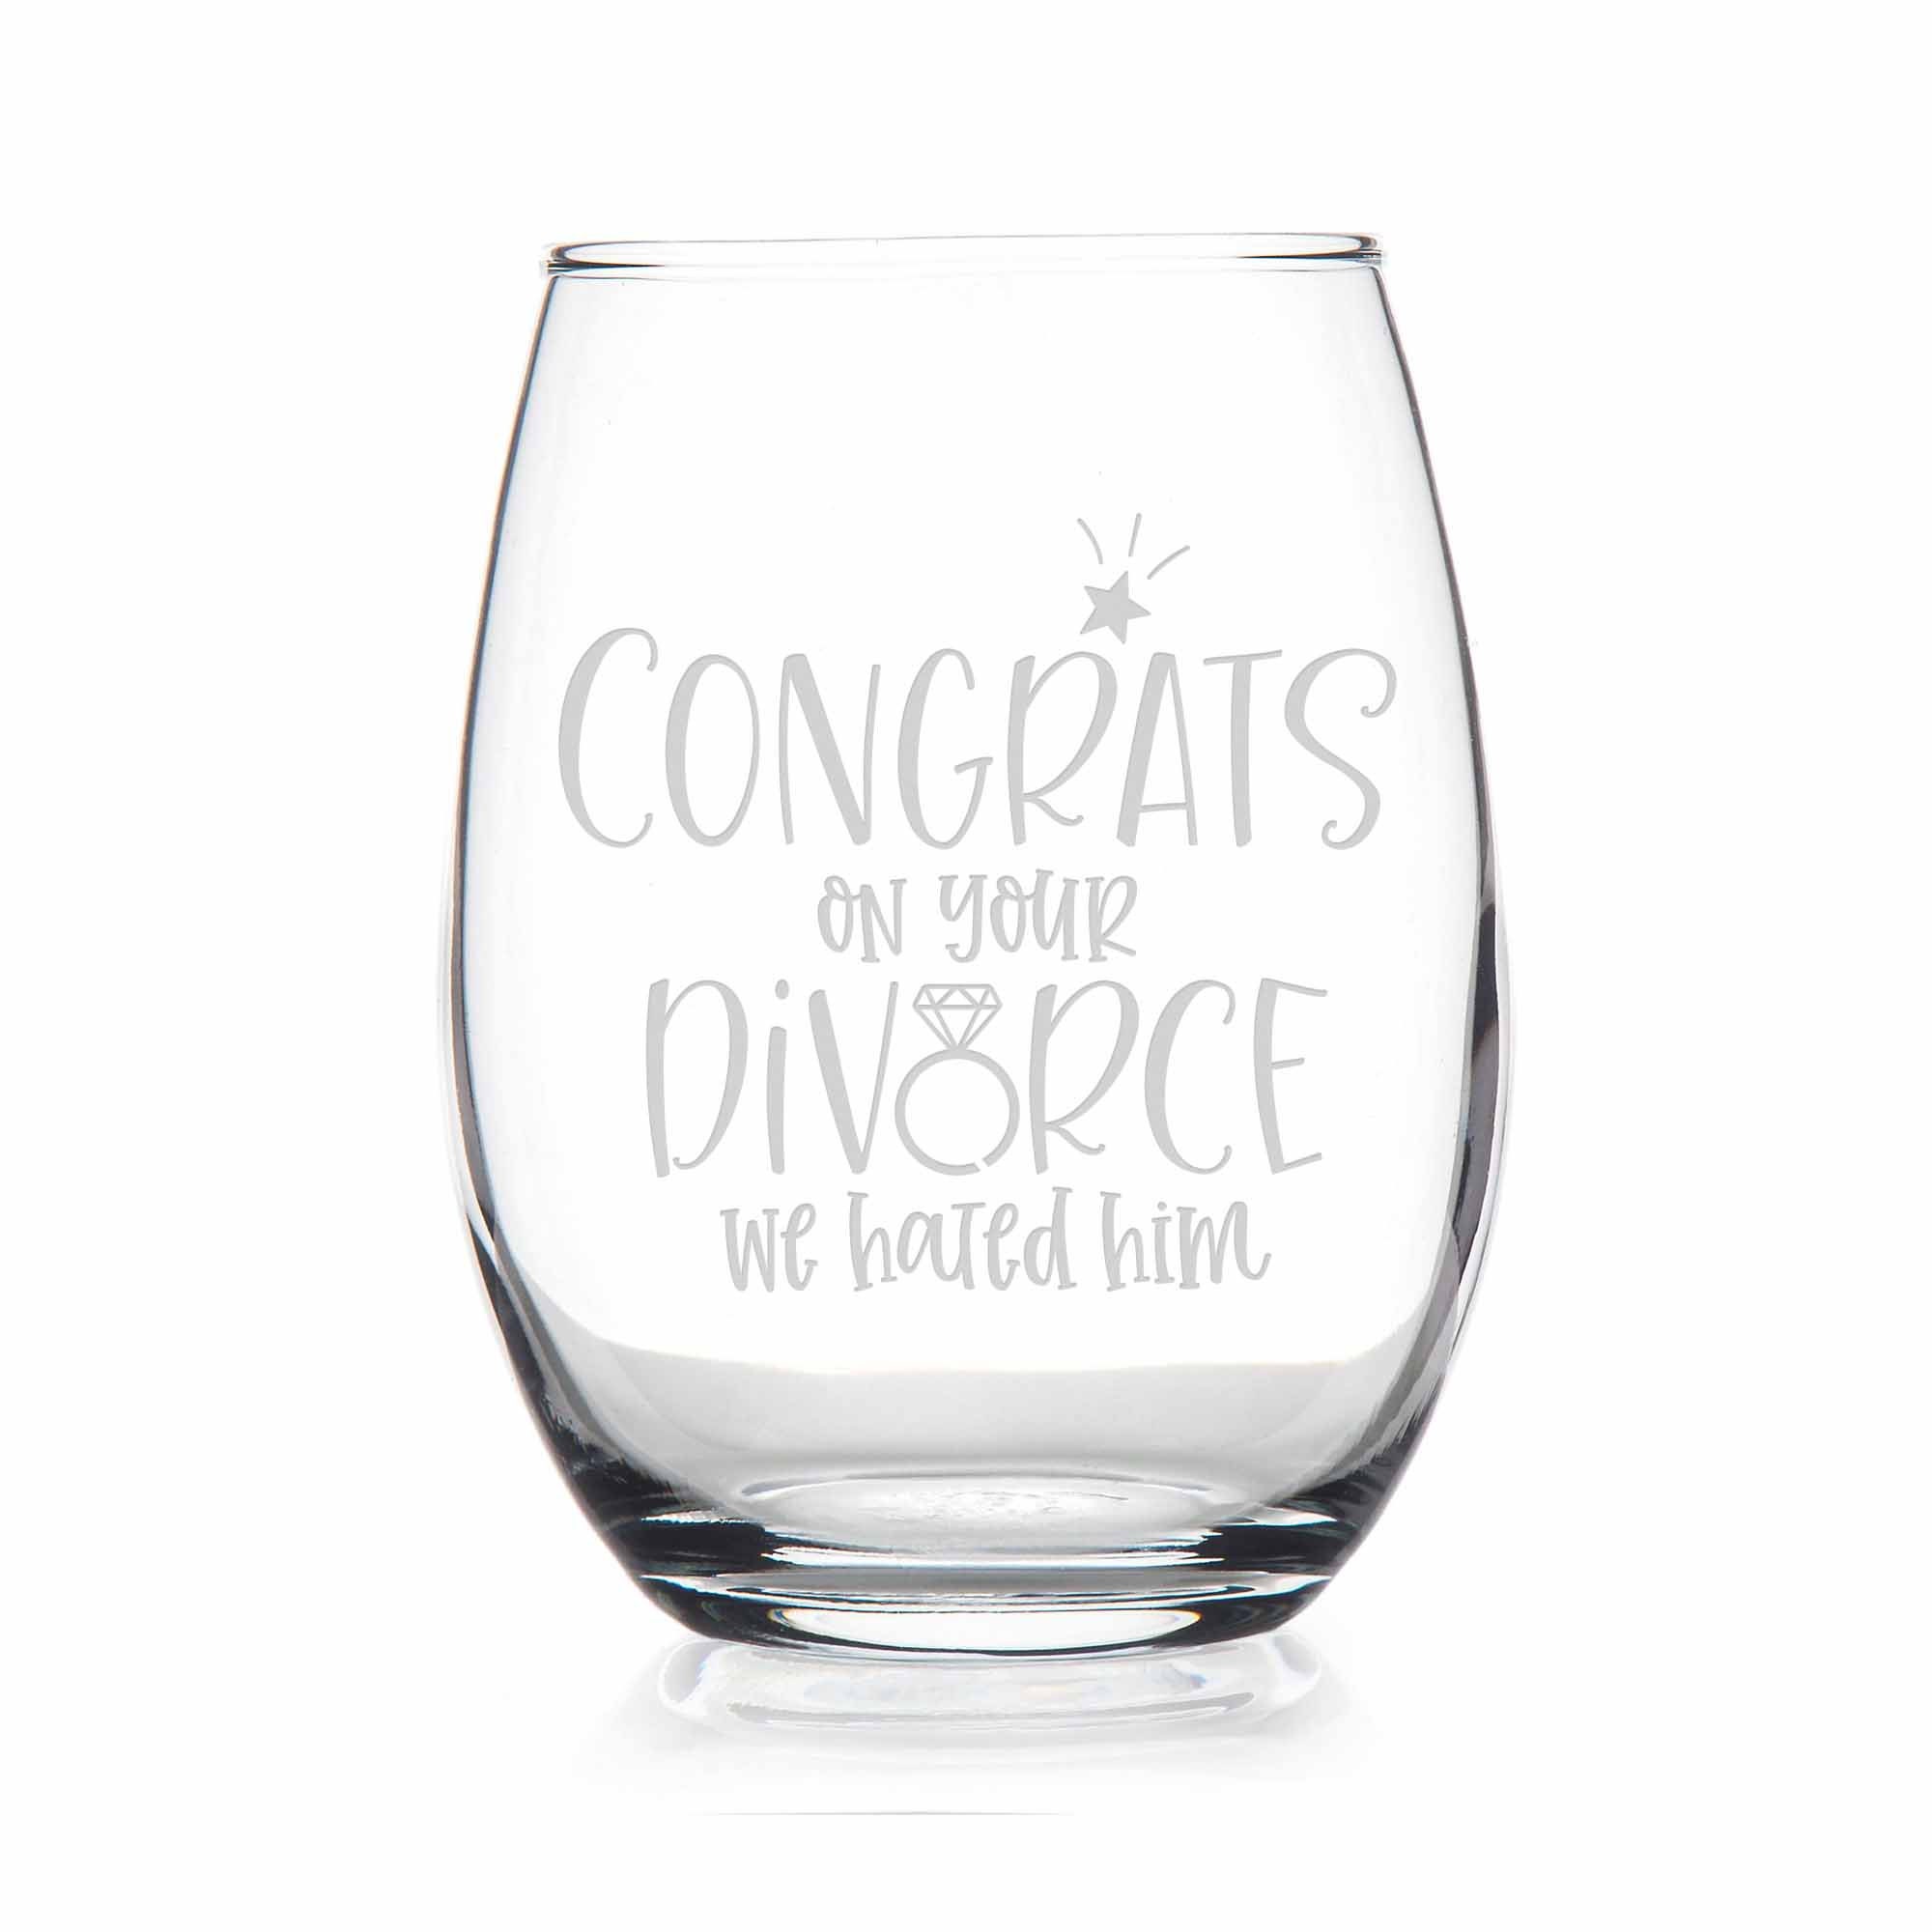 Shop4ever I used to Be Married But I'm Much Better Now Engraved Stemmed Wine Glass Funny Gift for Divorcee Divorce Party (16 oz.), Size: One size